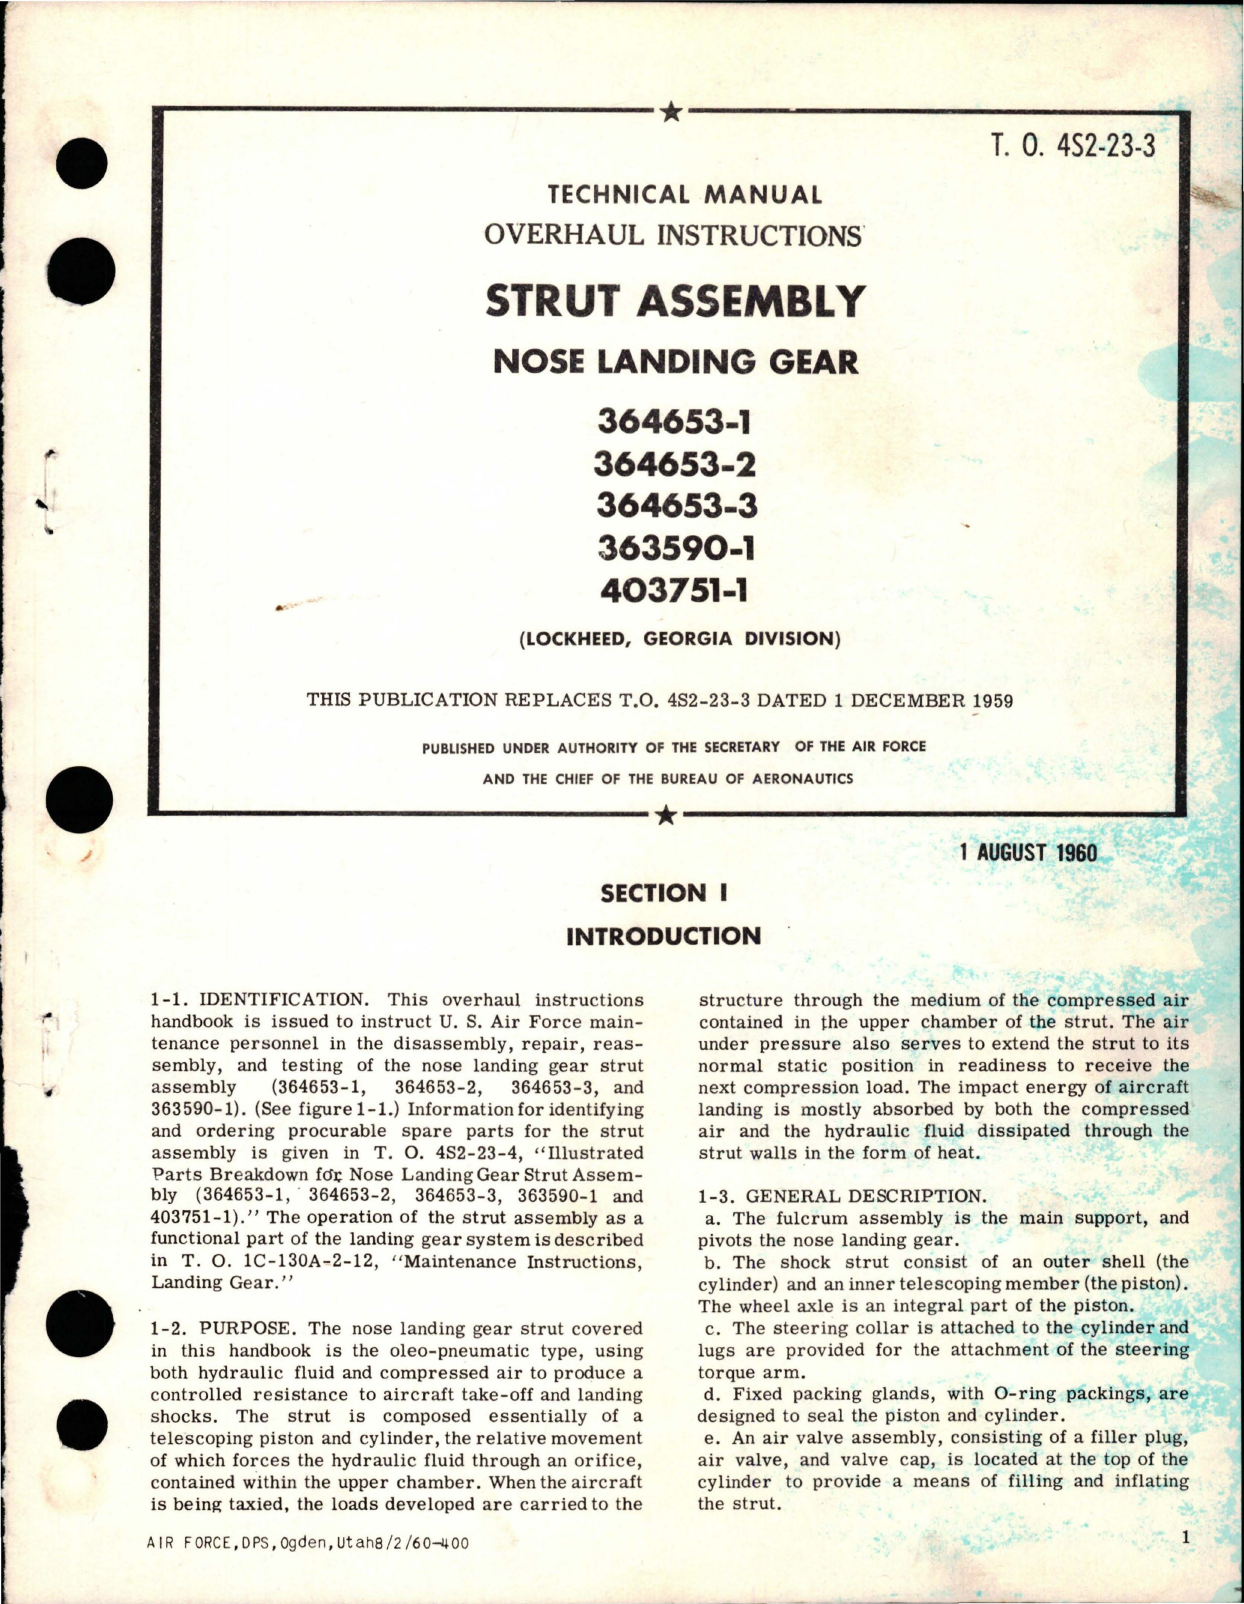 Sample page 1 from AirCorps Library document: Overhaul Instructions for Strut Assembly Nose Landing Gear